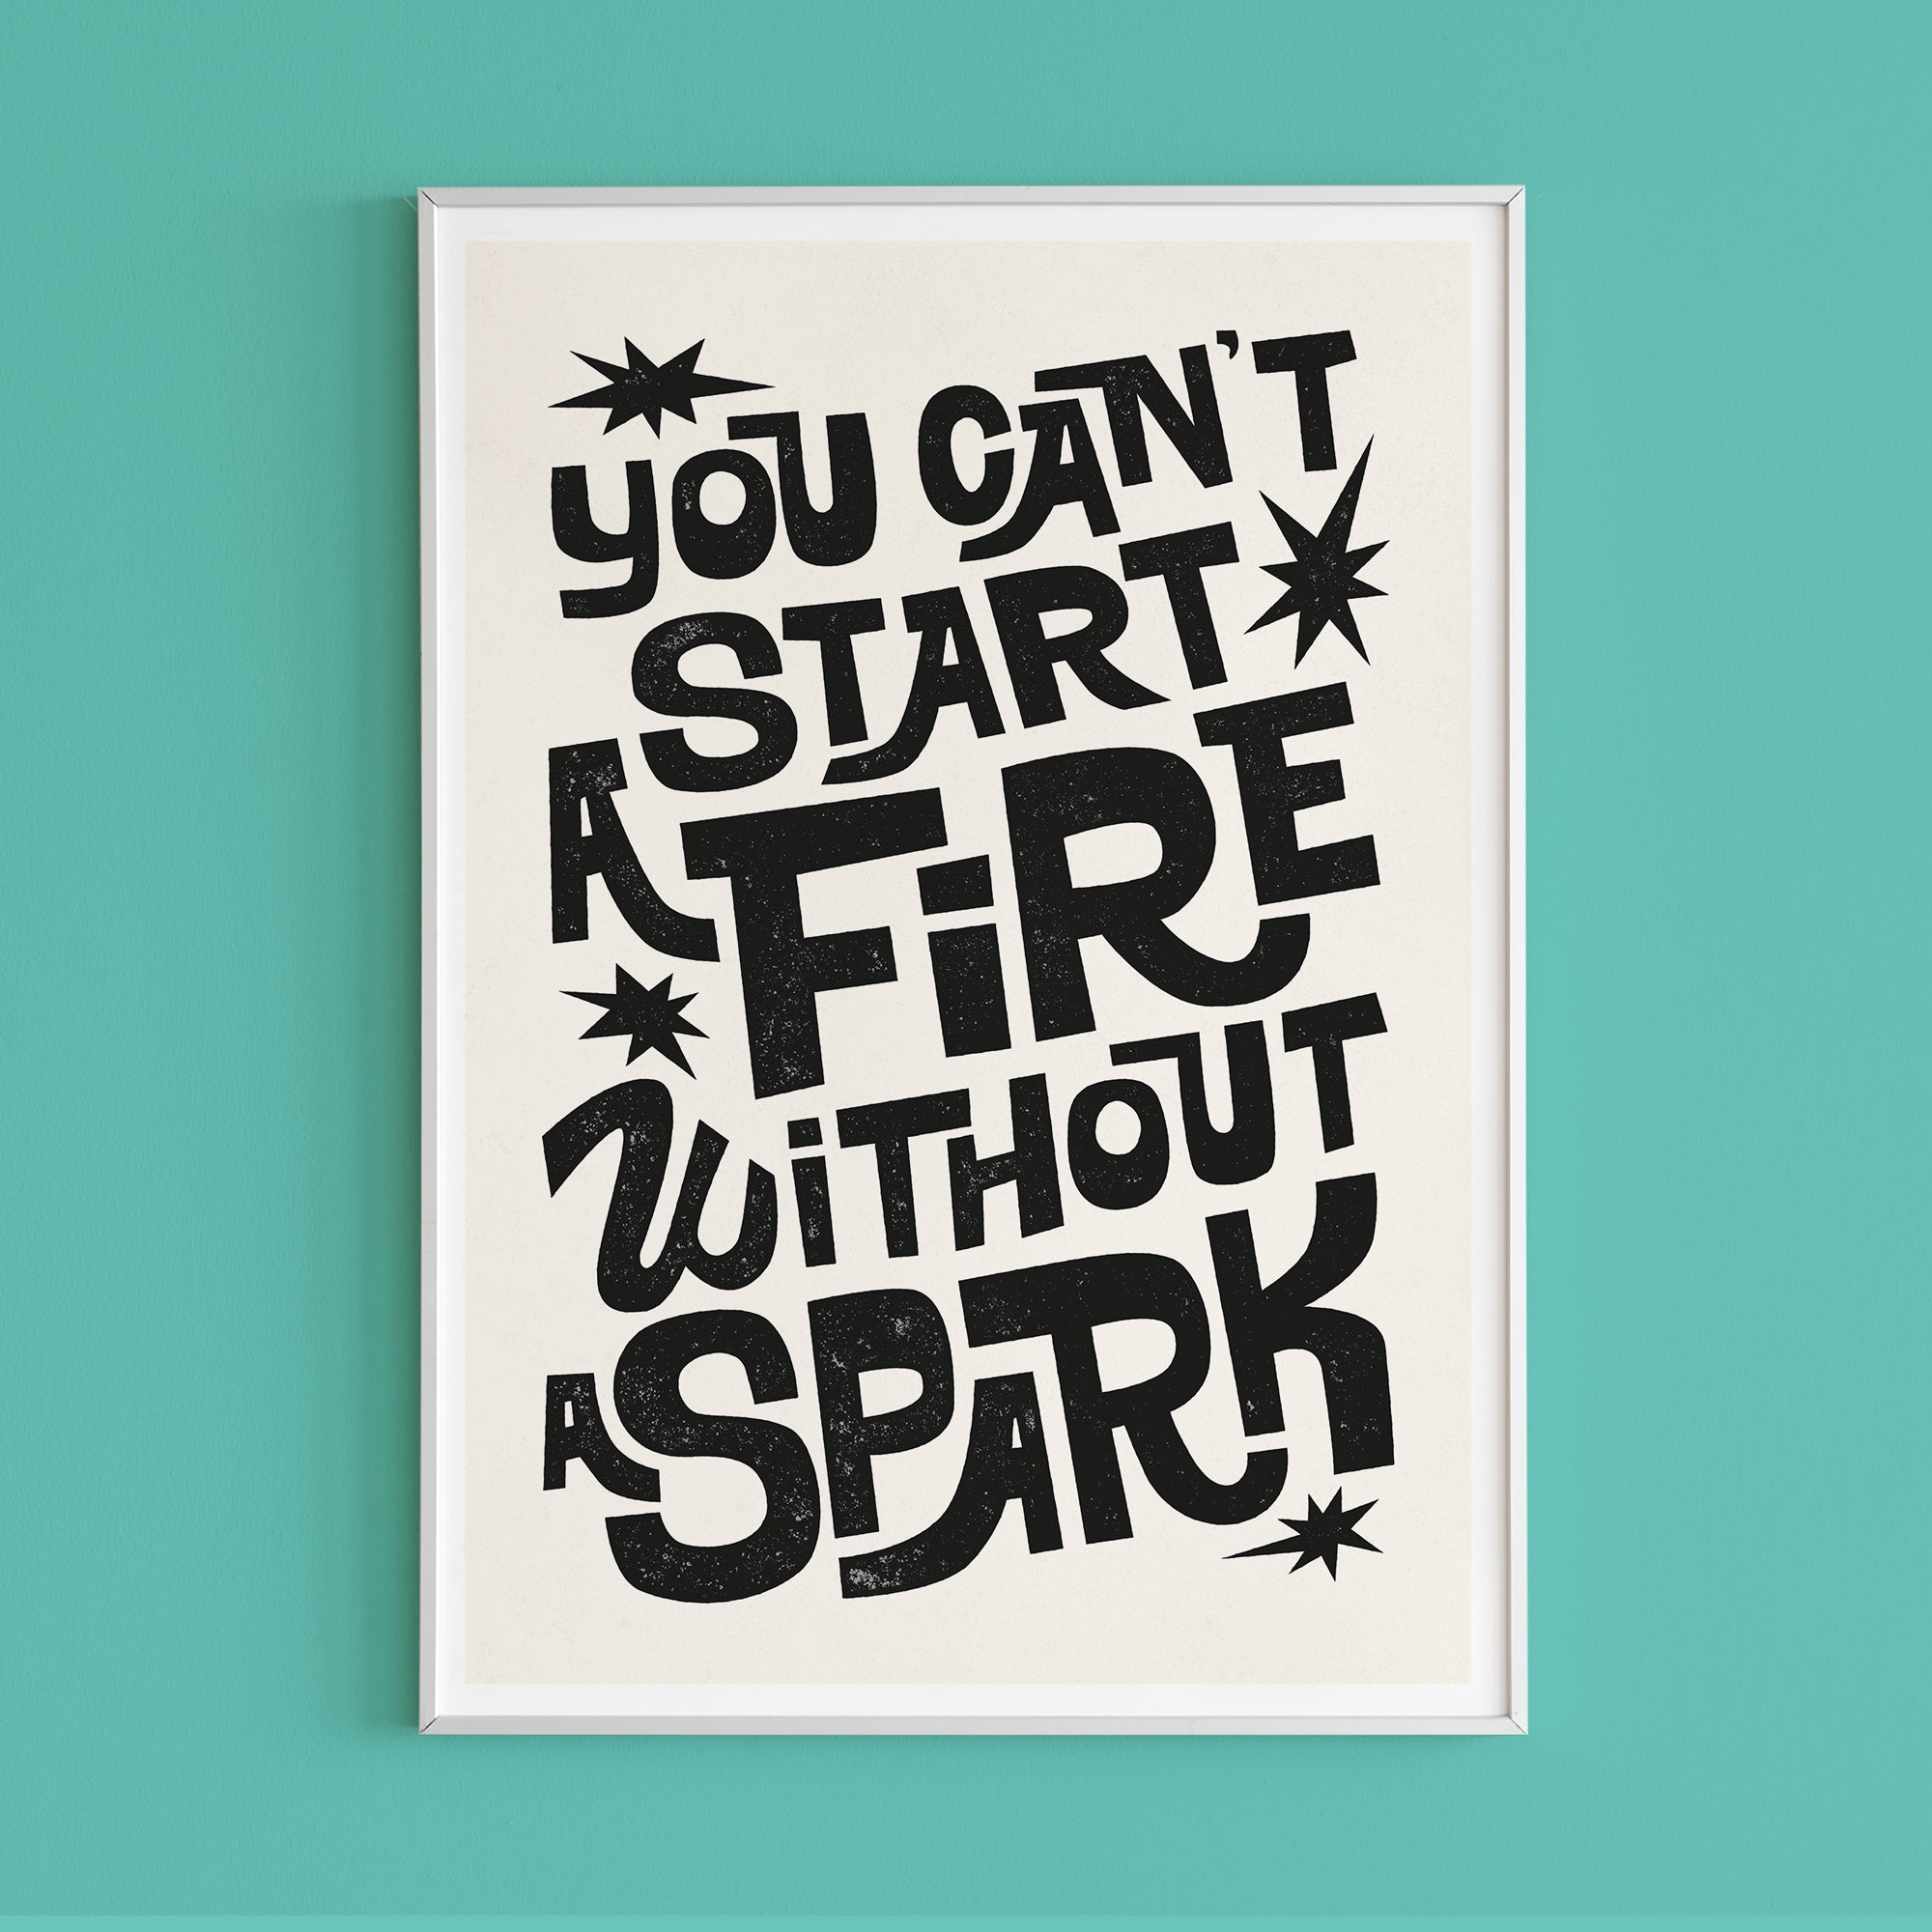 'You Can’t Start a Fire Without a Spark' - Motivational print